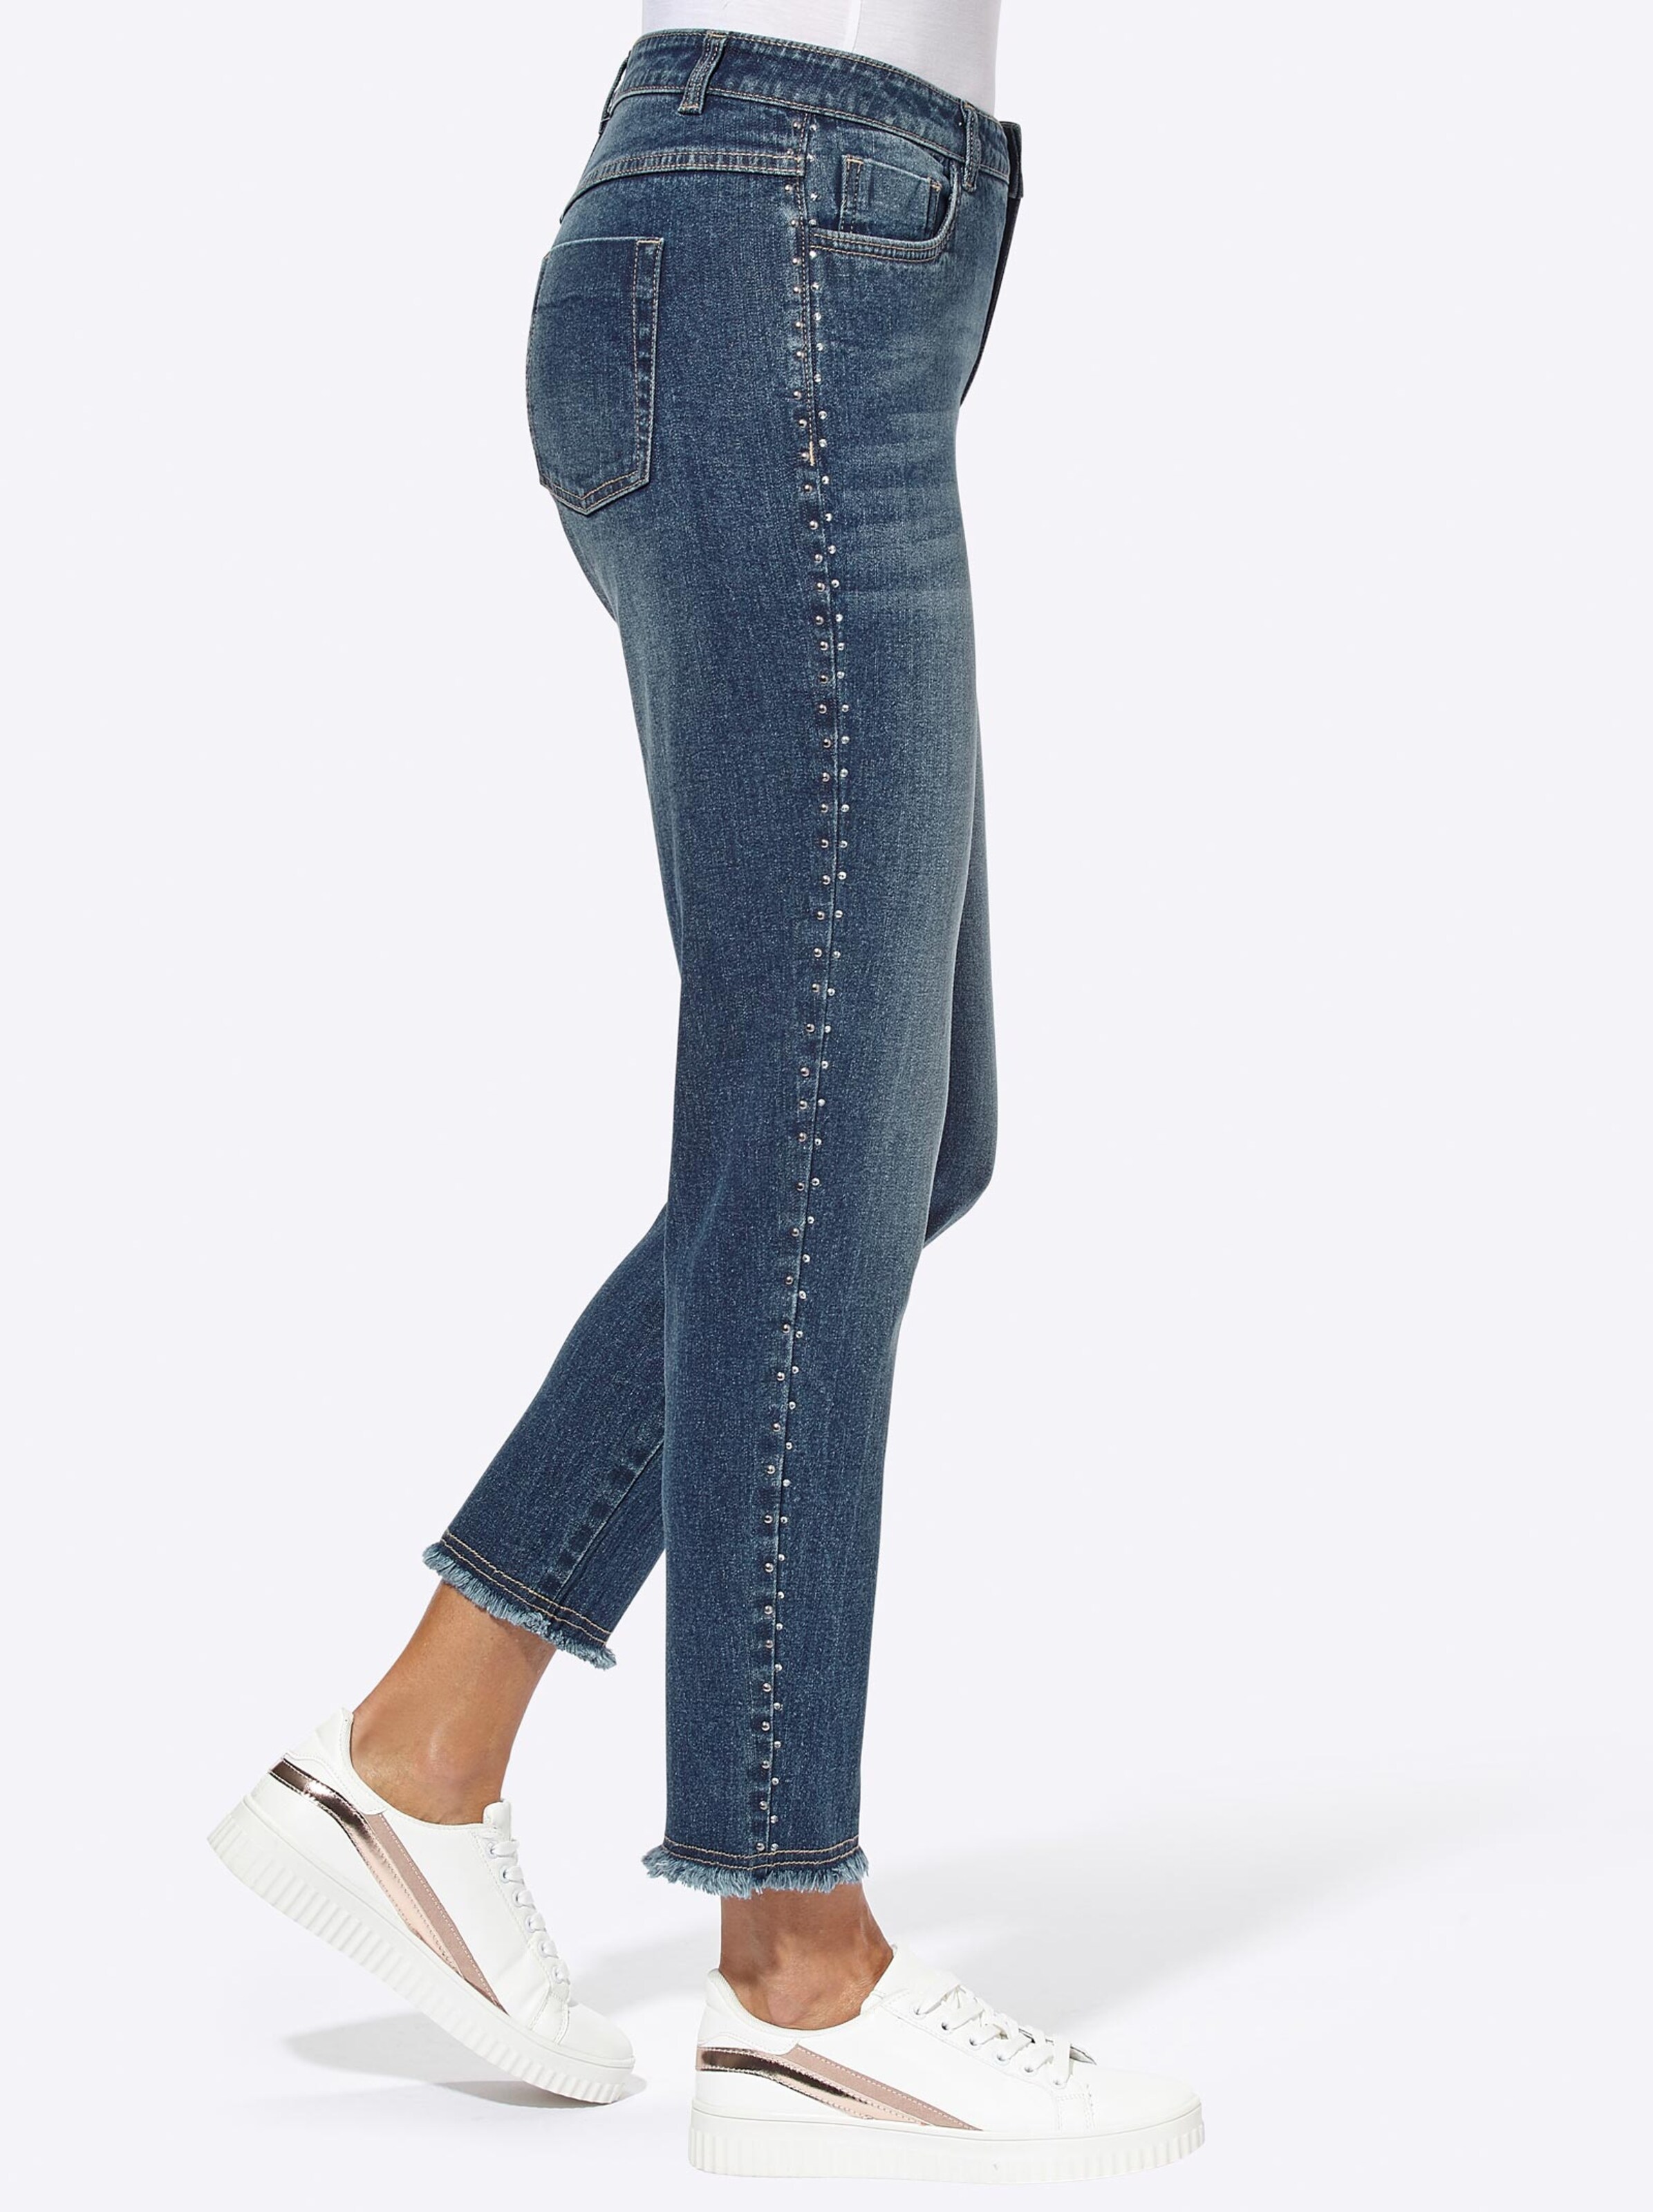 Damenmode Jeans 7/8-Jeans in blue-stone-washed 